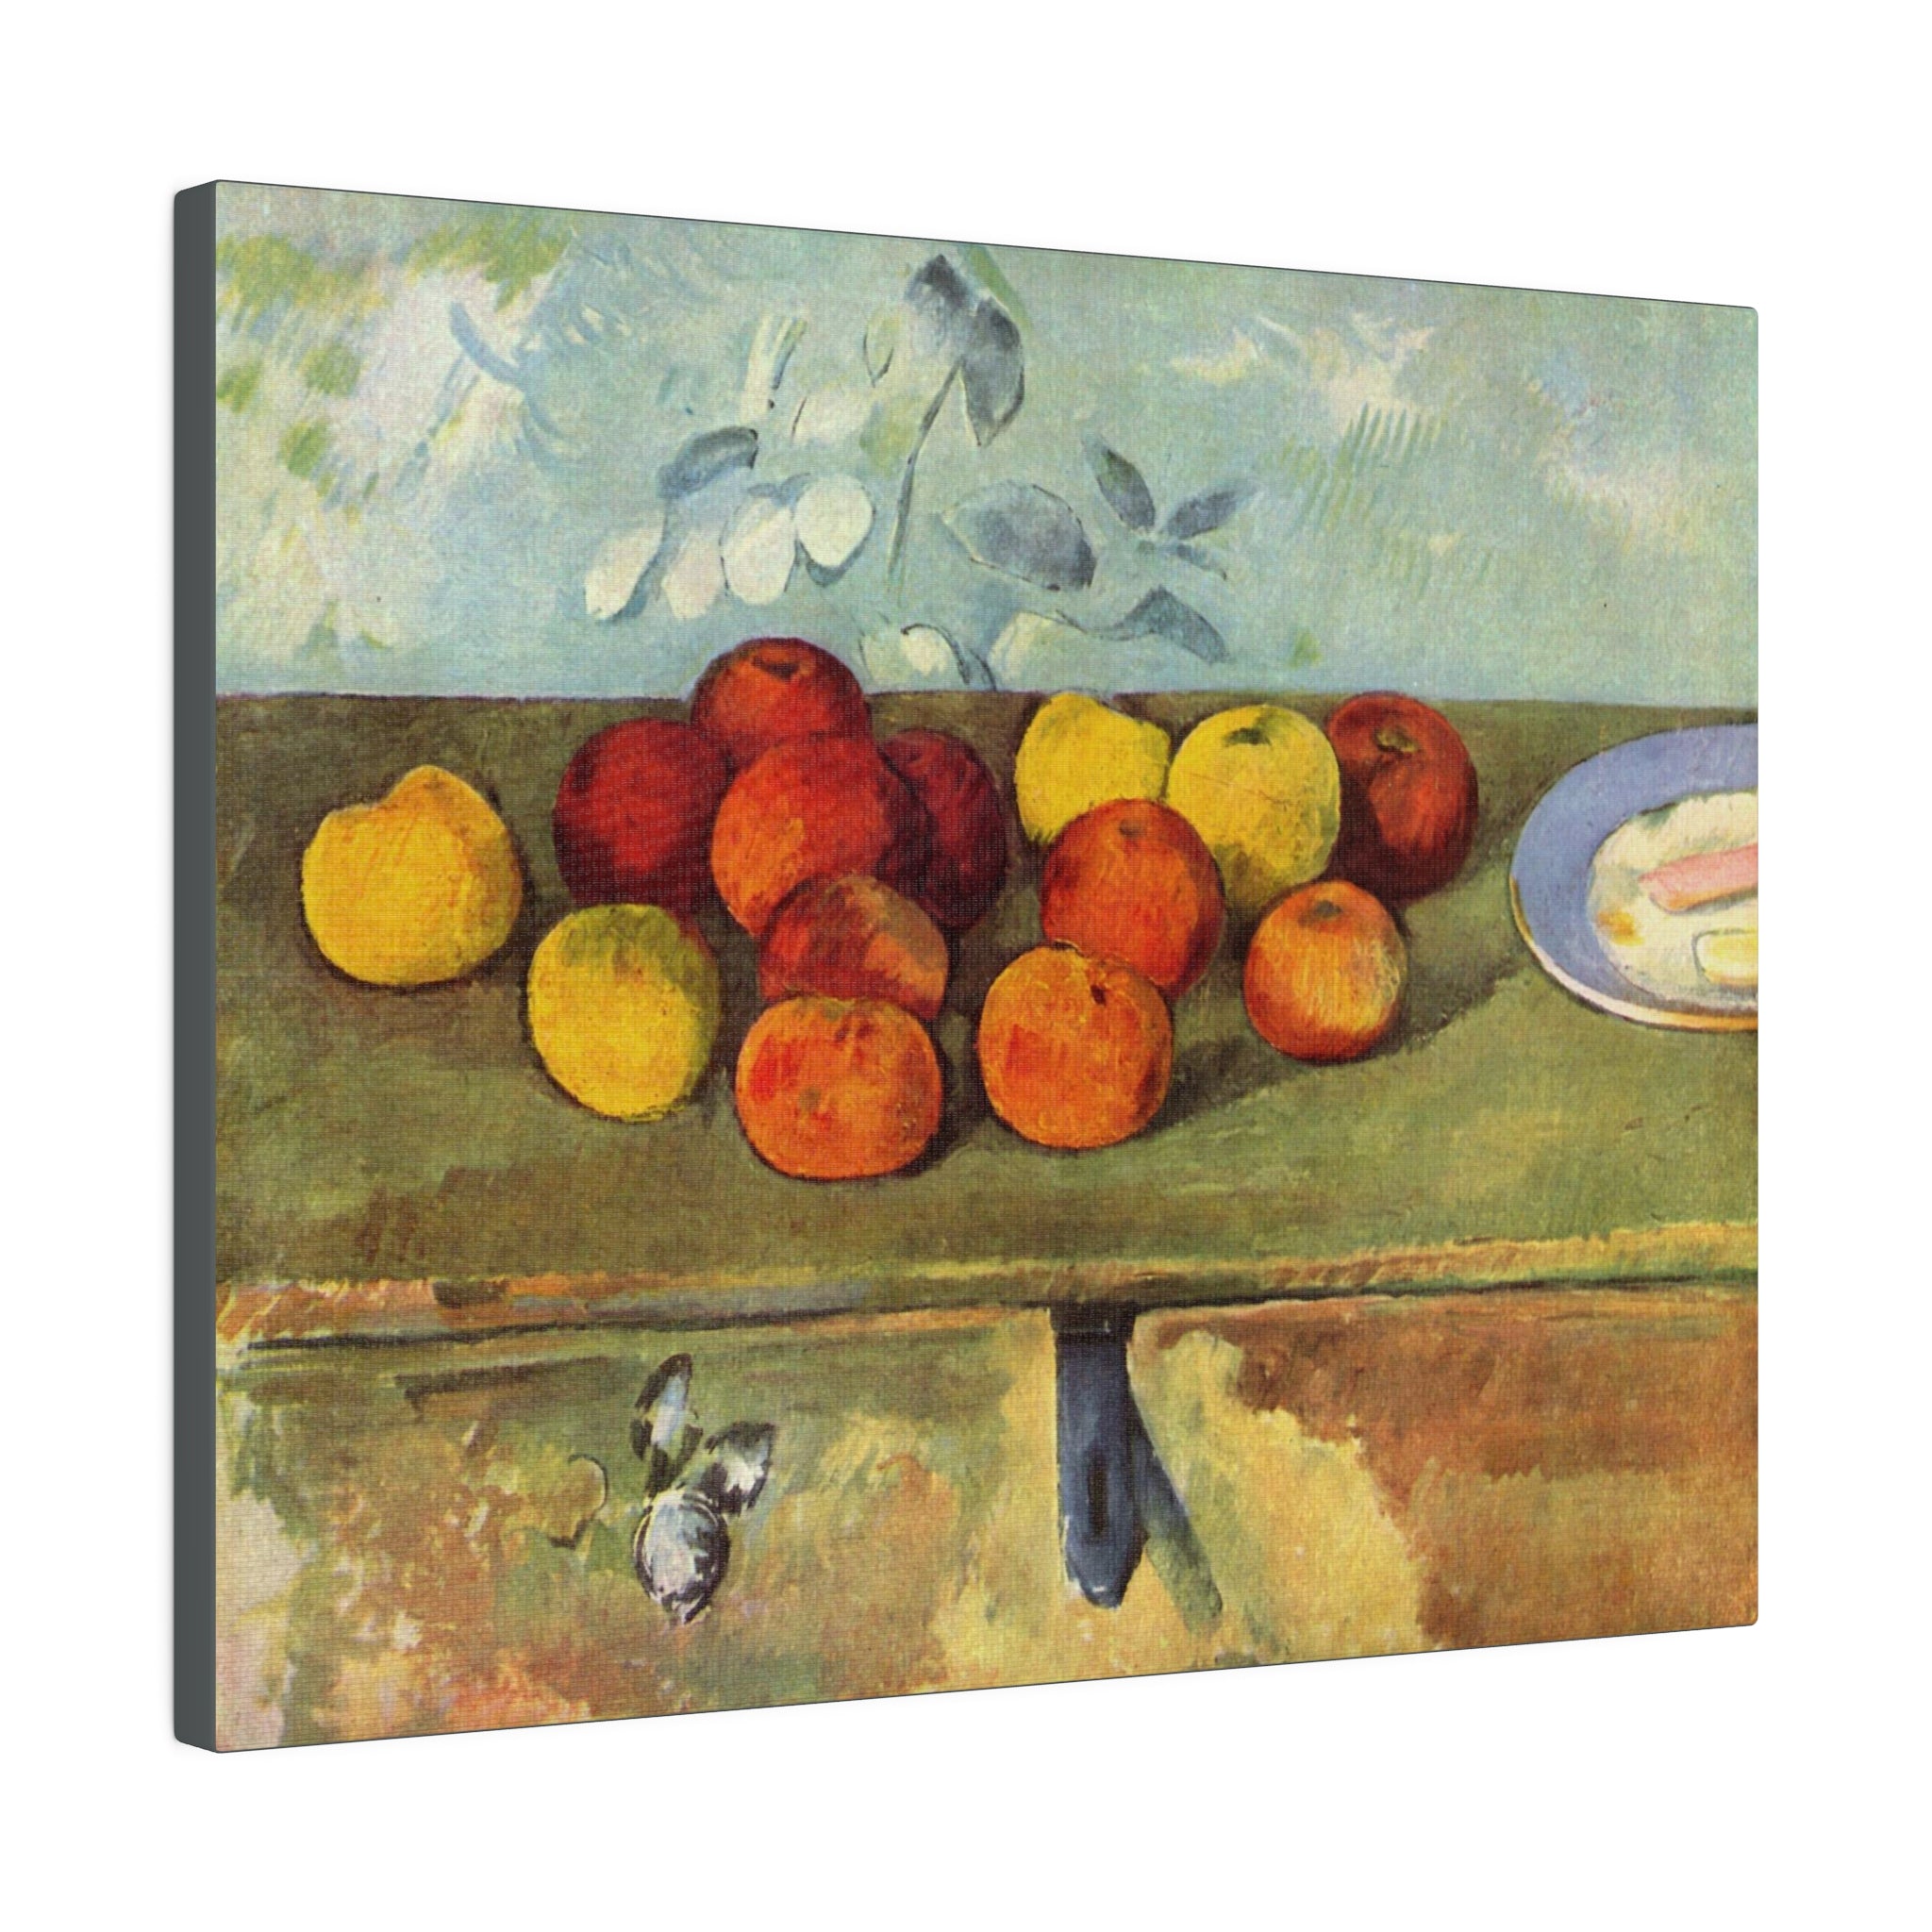 Apples & Biscuits 1895 - Paul Cezanne - Matte Canvas, Stretched, 0.75"